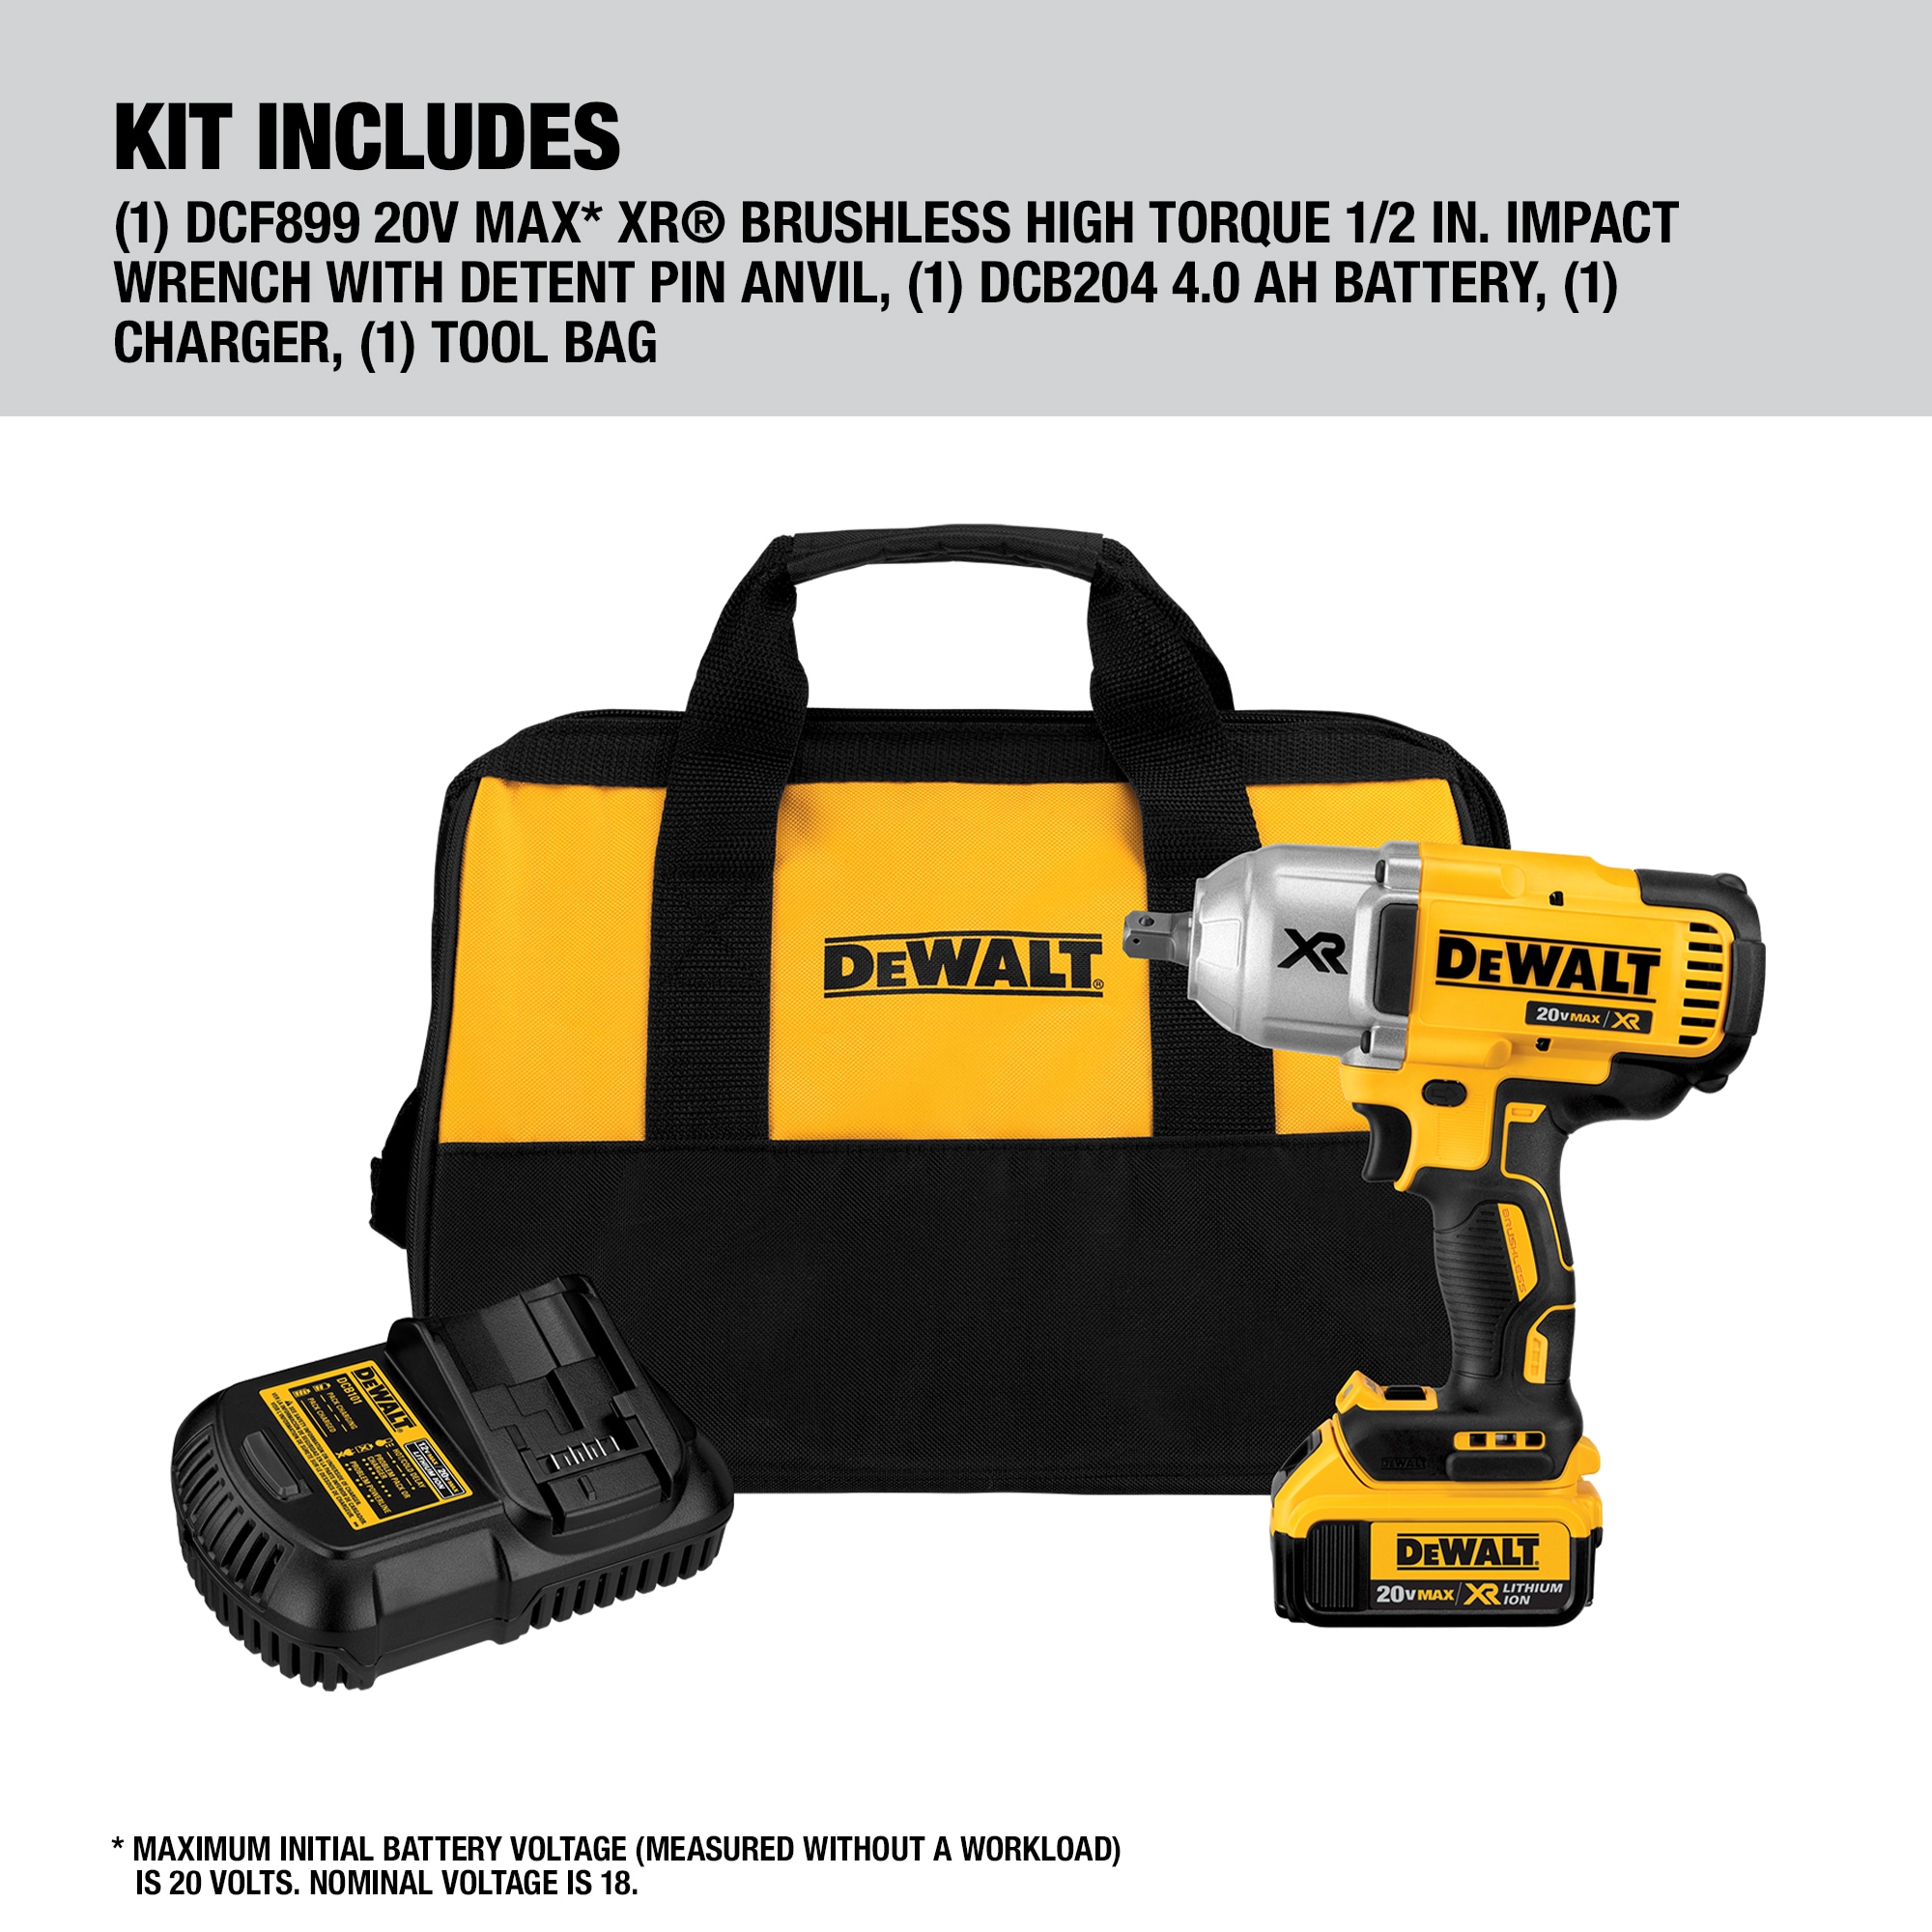 Veraangenamen Laboratorium Londen Shop DEWALT XR 20-volt Max Variable Speed Brushless 1/2-in Drive Cordless Impact  Wrench (1-Battery Included) & 10-Piece 1/2-in Drive Set Hex Bit Standard  (SAE) Driver Socket Set at Lowes.com